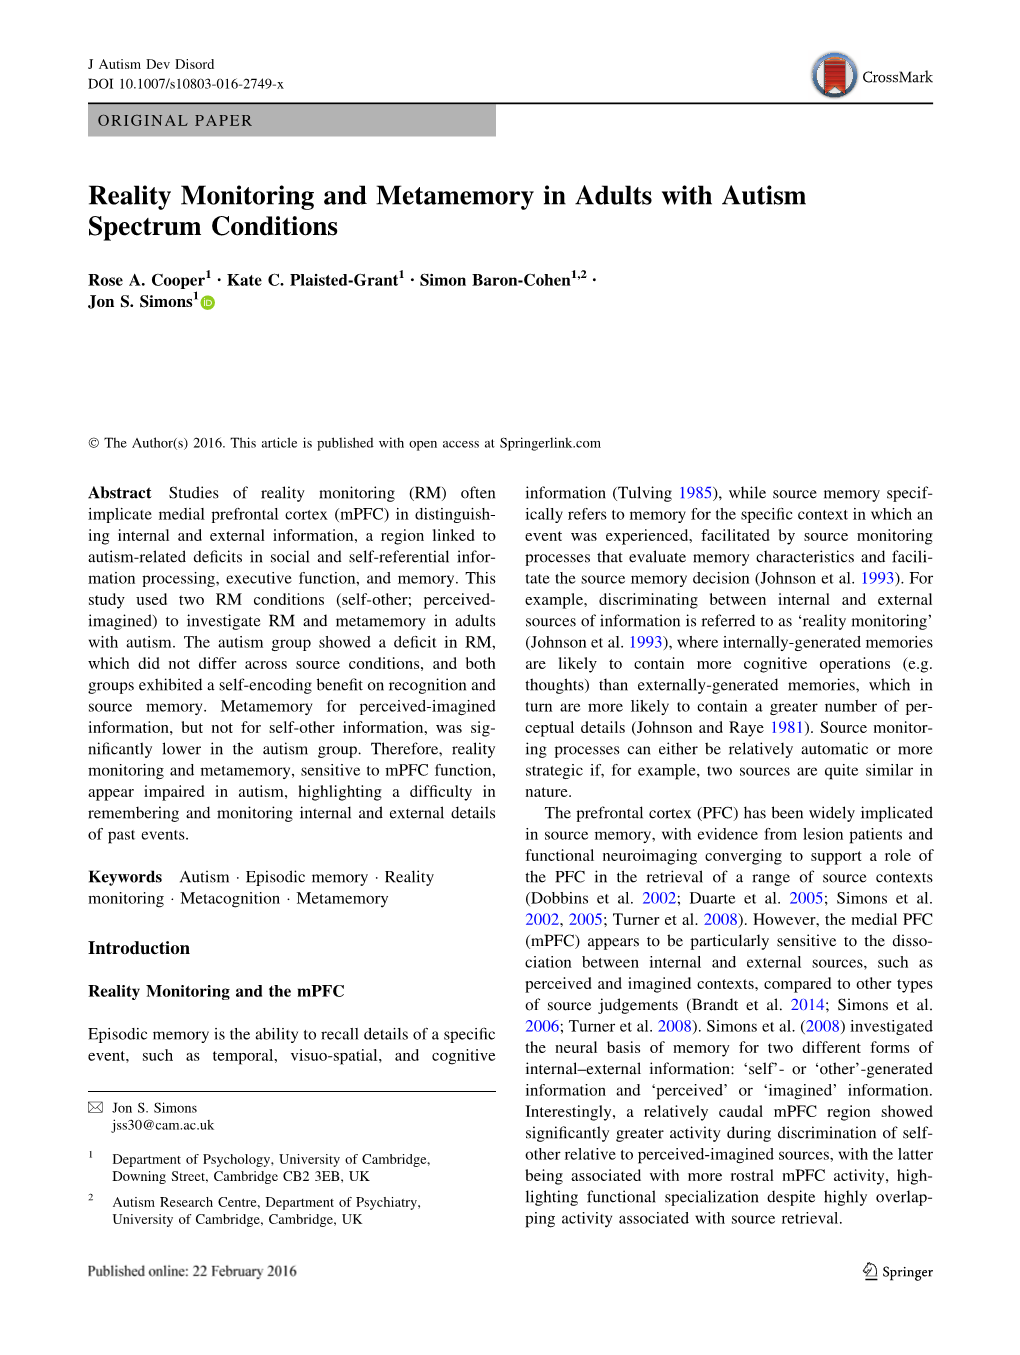 Reality Monitoring and Metamemory in Adults with Autism Spectrum Conditions